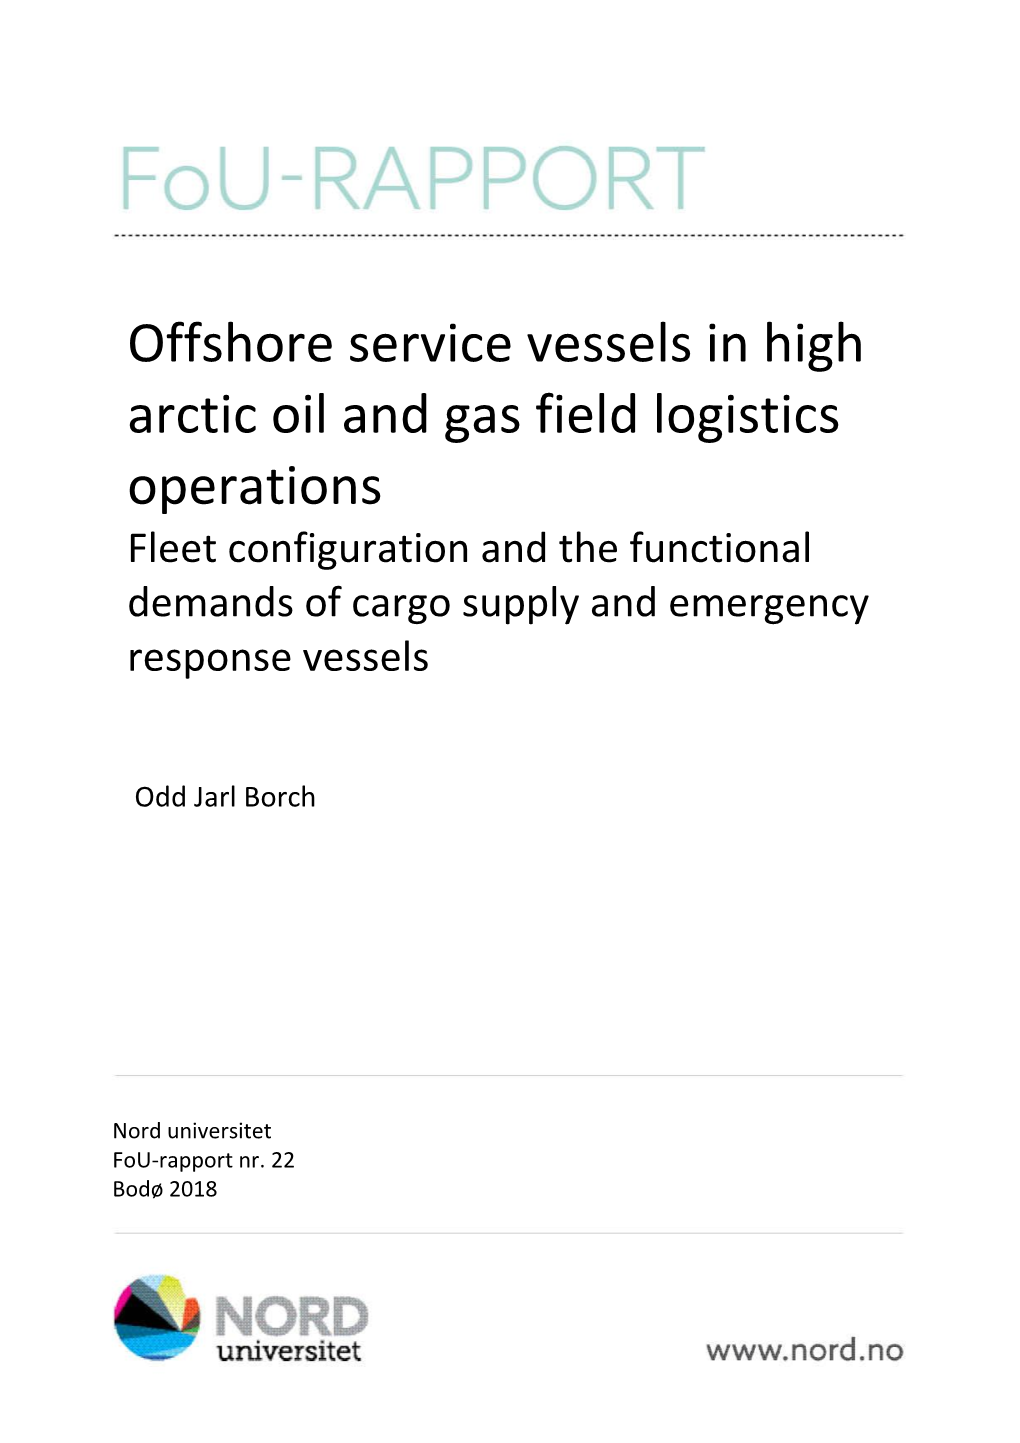 Offshore Service Vessels in High Arctic Oil and Gas Field Logistics Operations